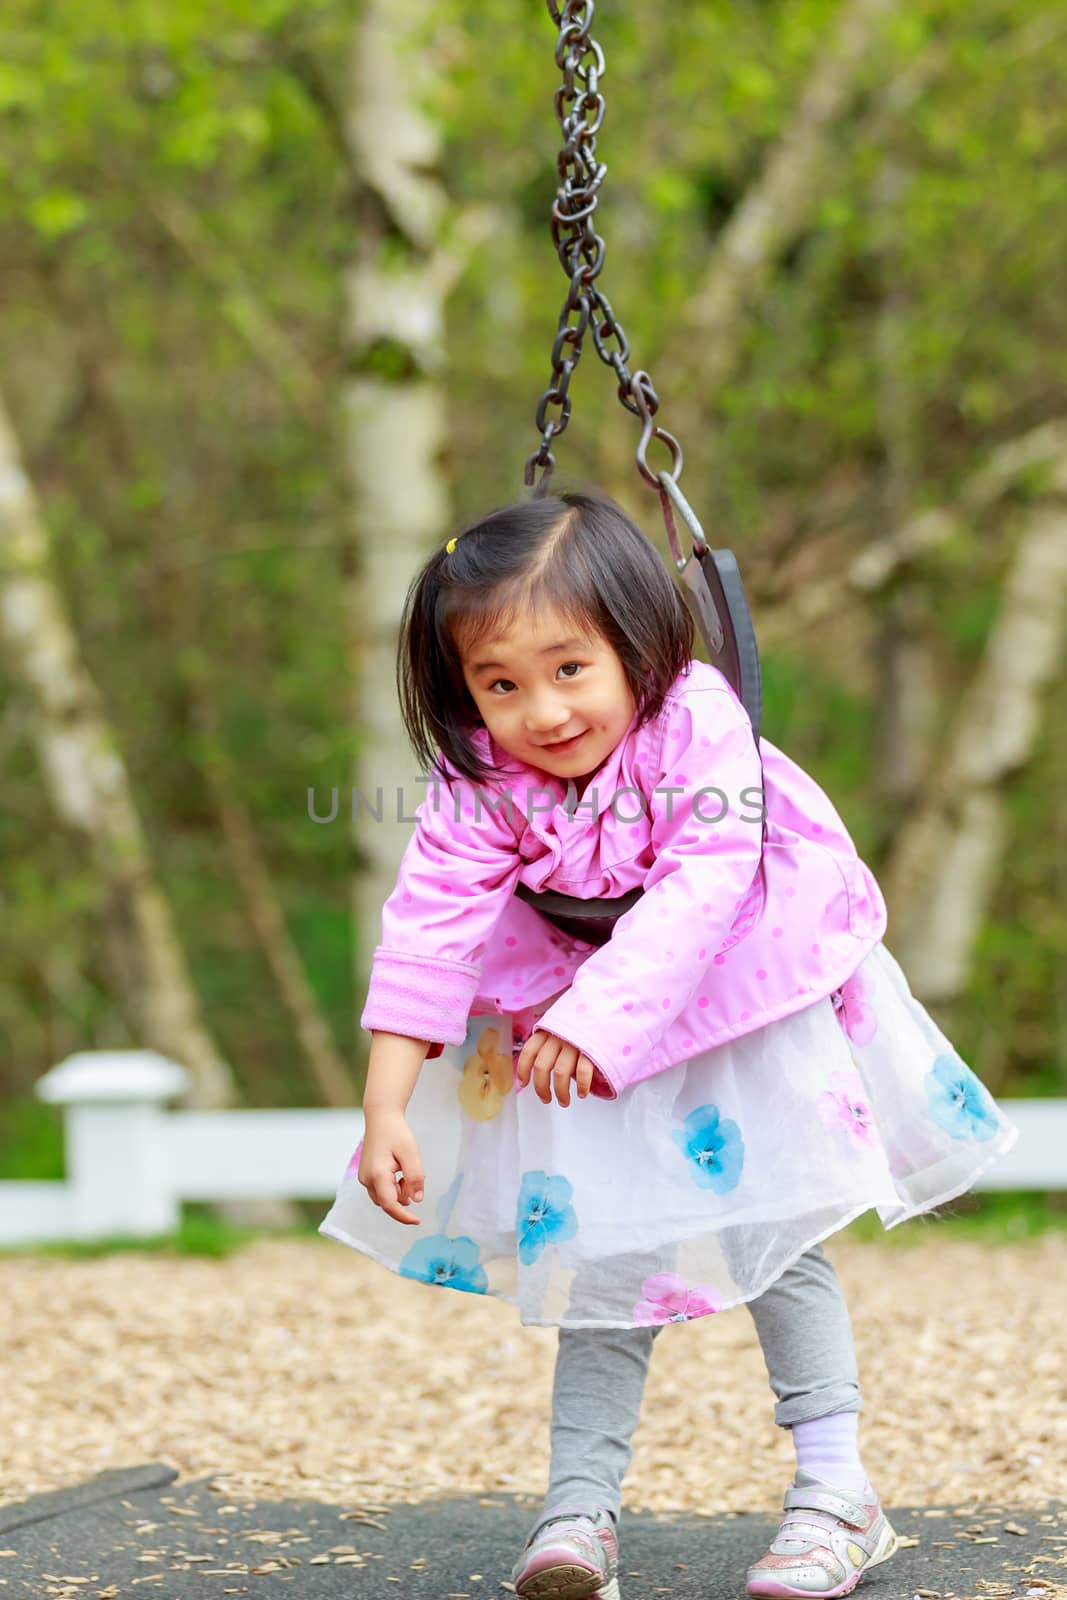 Adorable girl plays in the playground, twisted on the swing